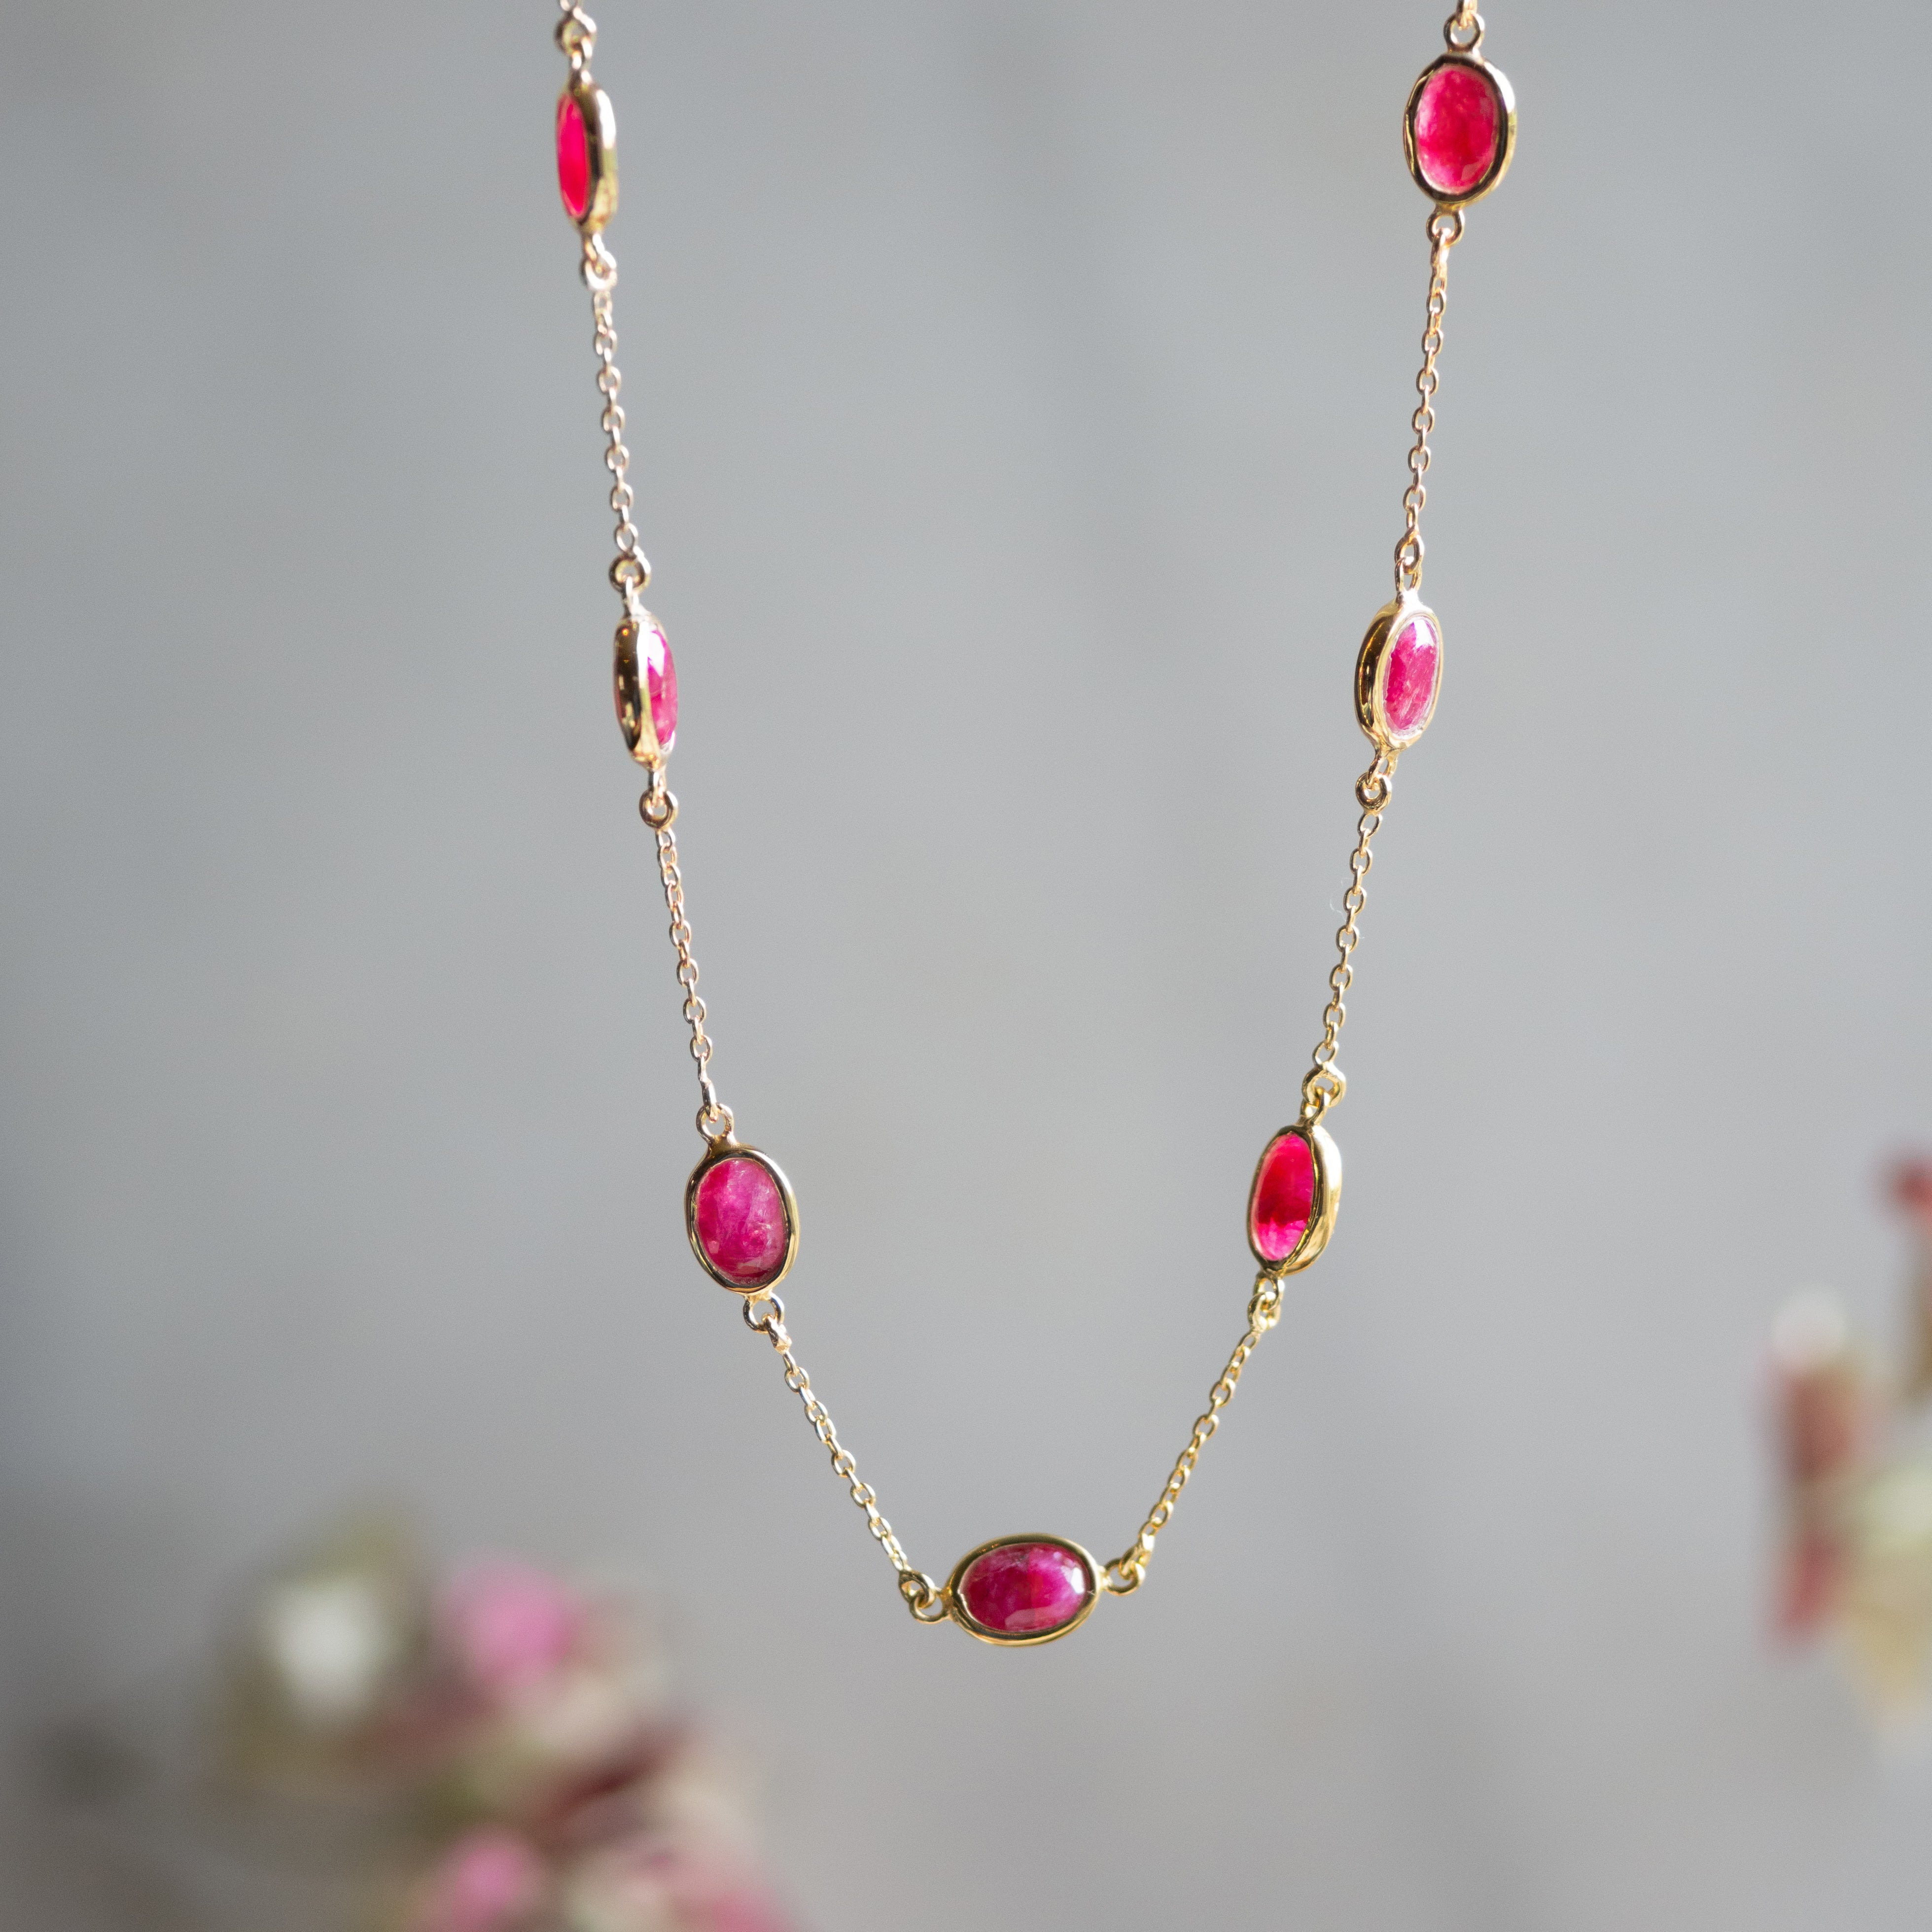 marilyn gold necklace with ruby quartz from memara